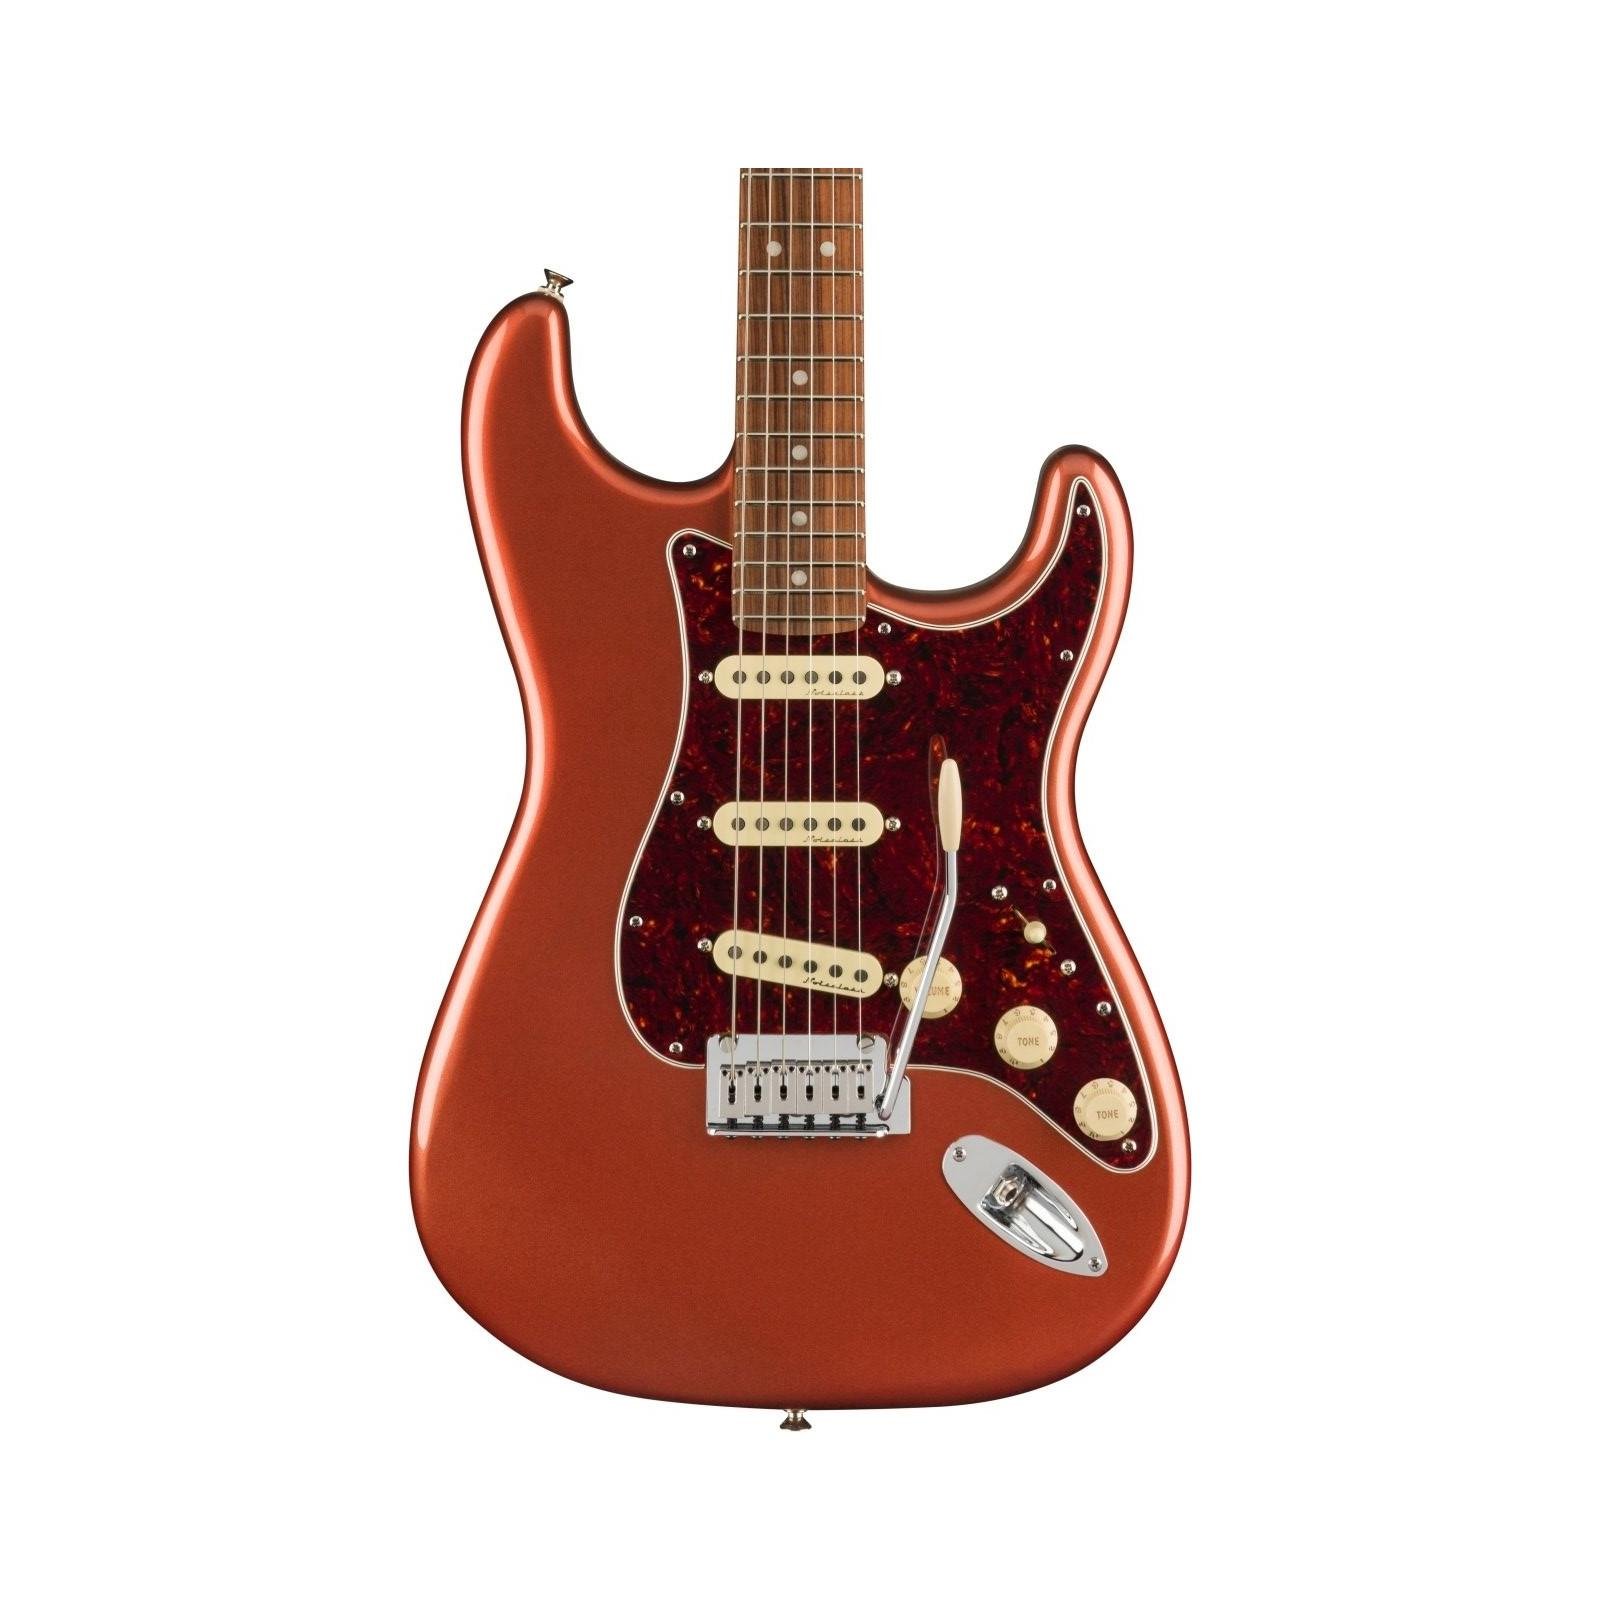 Fender Player Plus Stratocaster, Pau Ferro Fingerboard, Aged Candy Apple Red